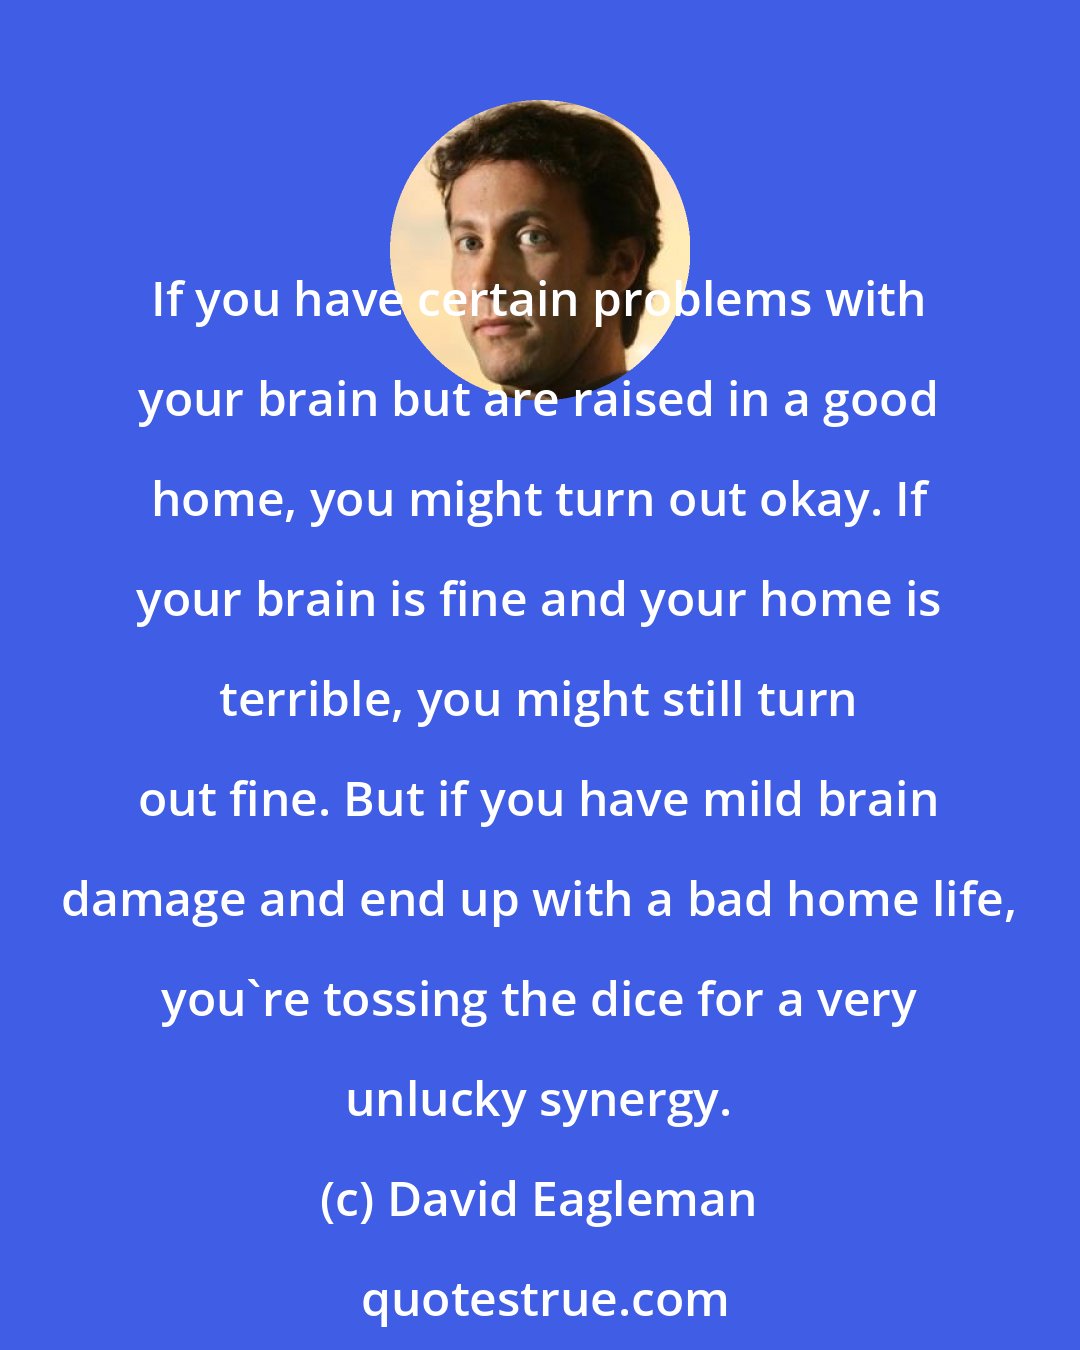 David Eagleman: If you have certain problems with your brain but are raised in a good home, you might turn out okay. If your brain is fine and your home is terrible, you might still turn out fine. But if you have mild brain damage and end up with a bad home life, you're tossing the dice for a very unlucky synergy.